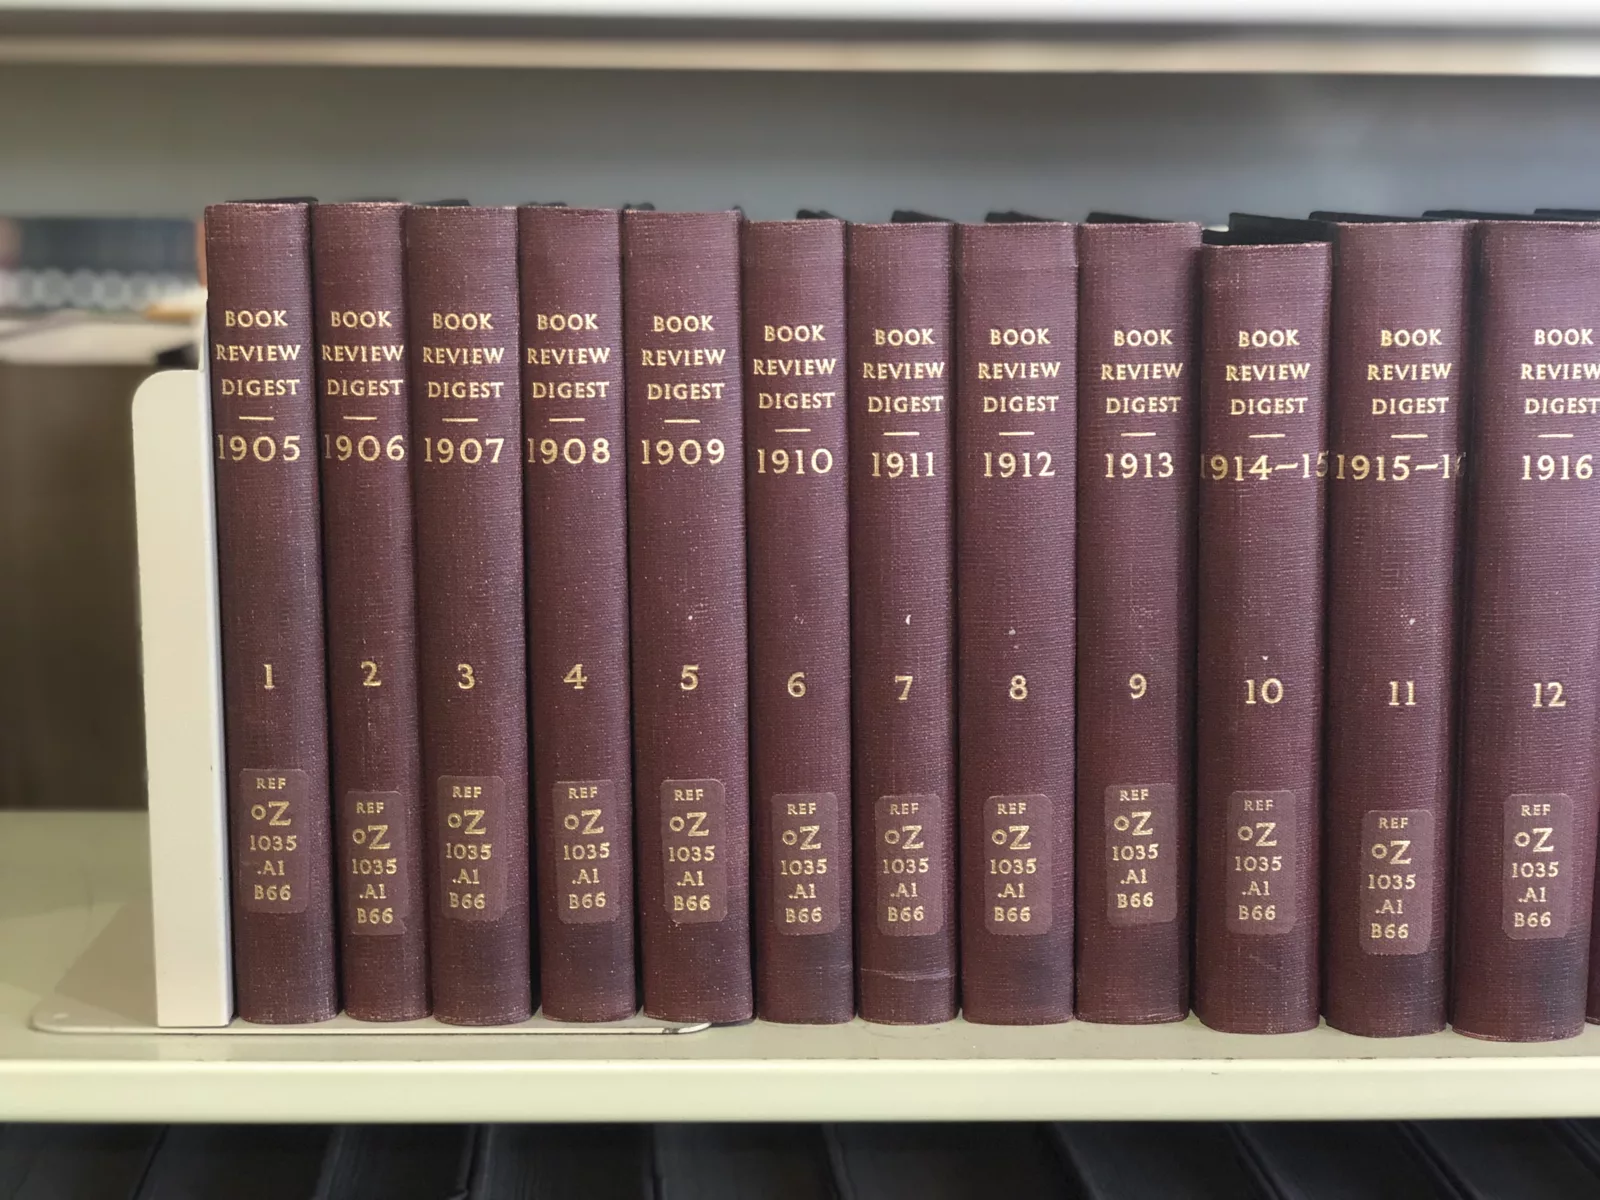 A vital part of the Newberry's visual identity, the Newberry typeface appears on the book bindings of reference sources available on the library's third floor.